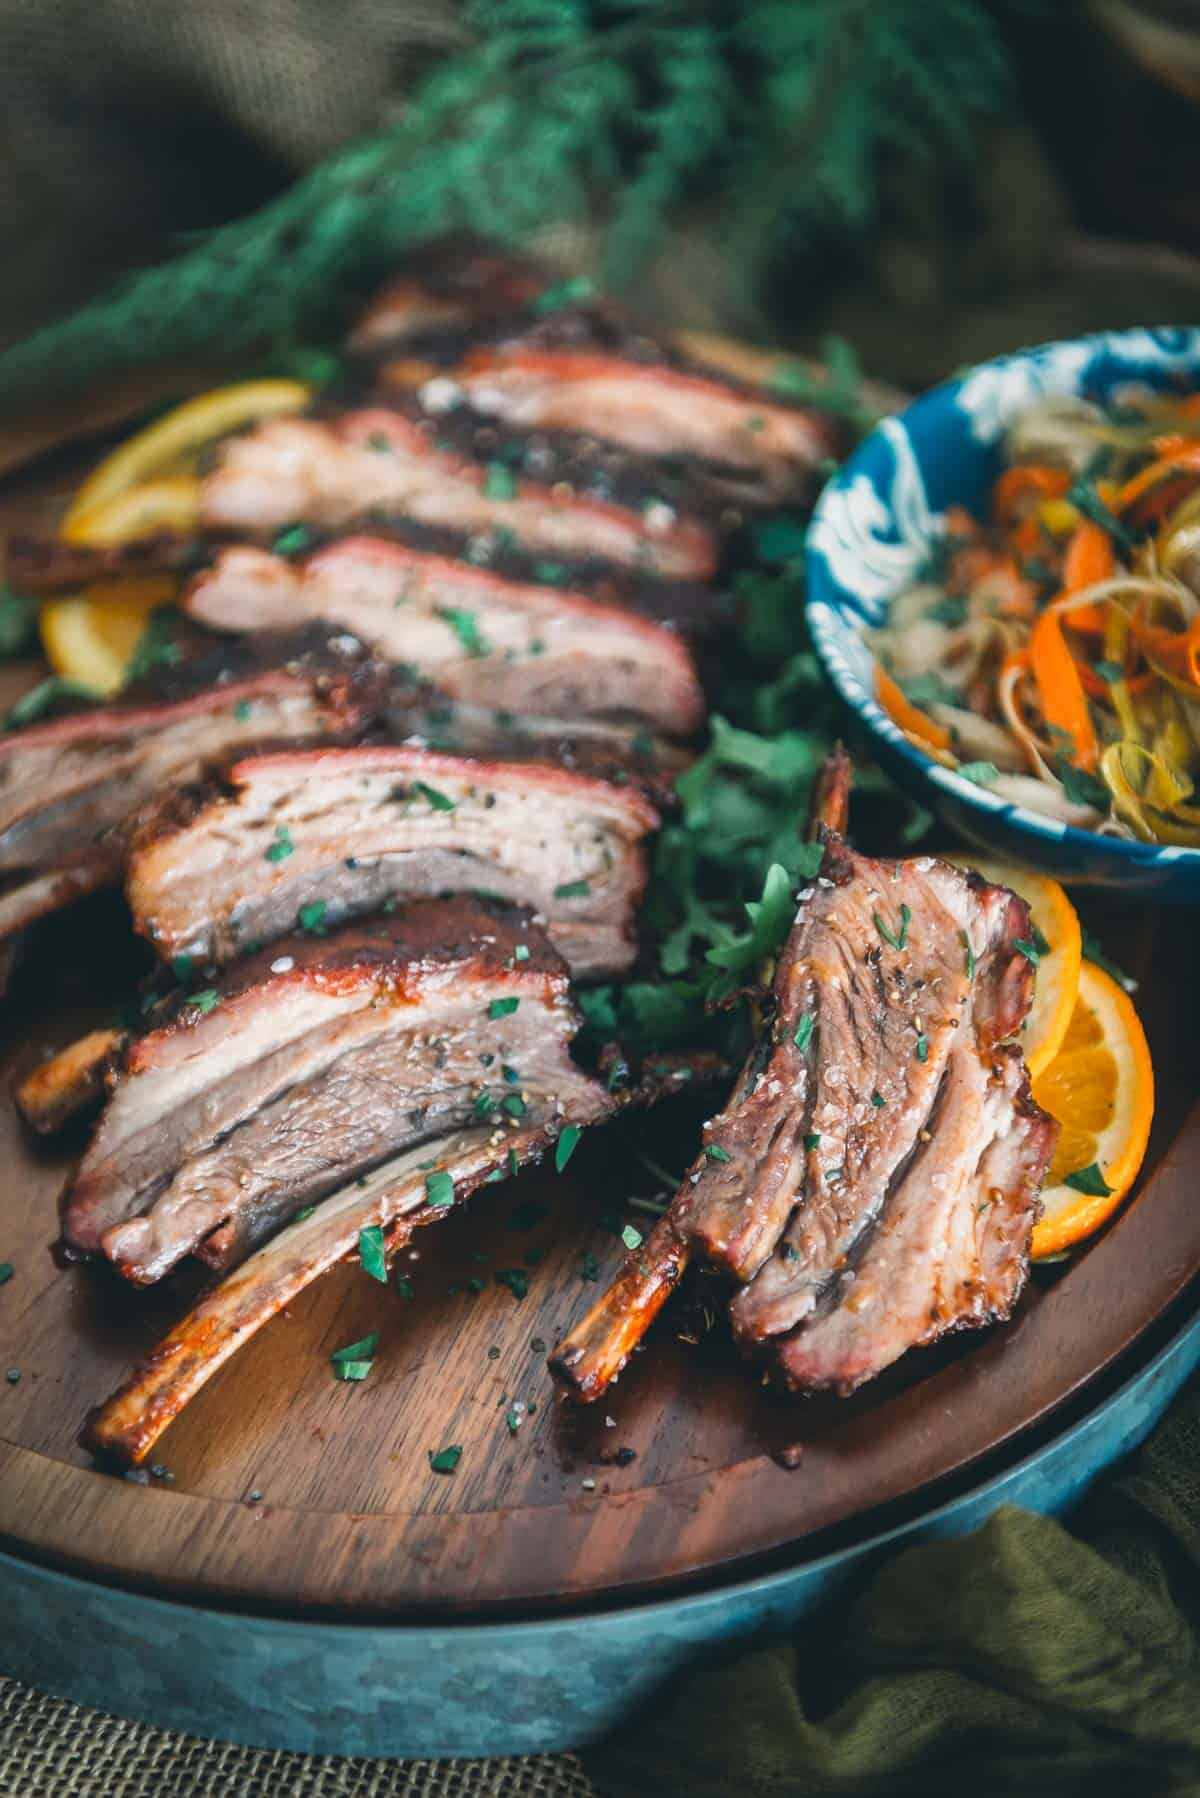 Bbq ribs on a wooden board with orange slices.